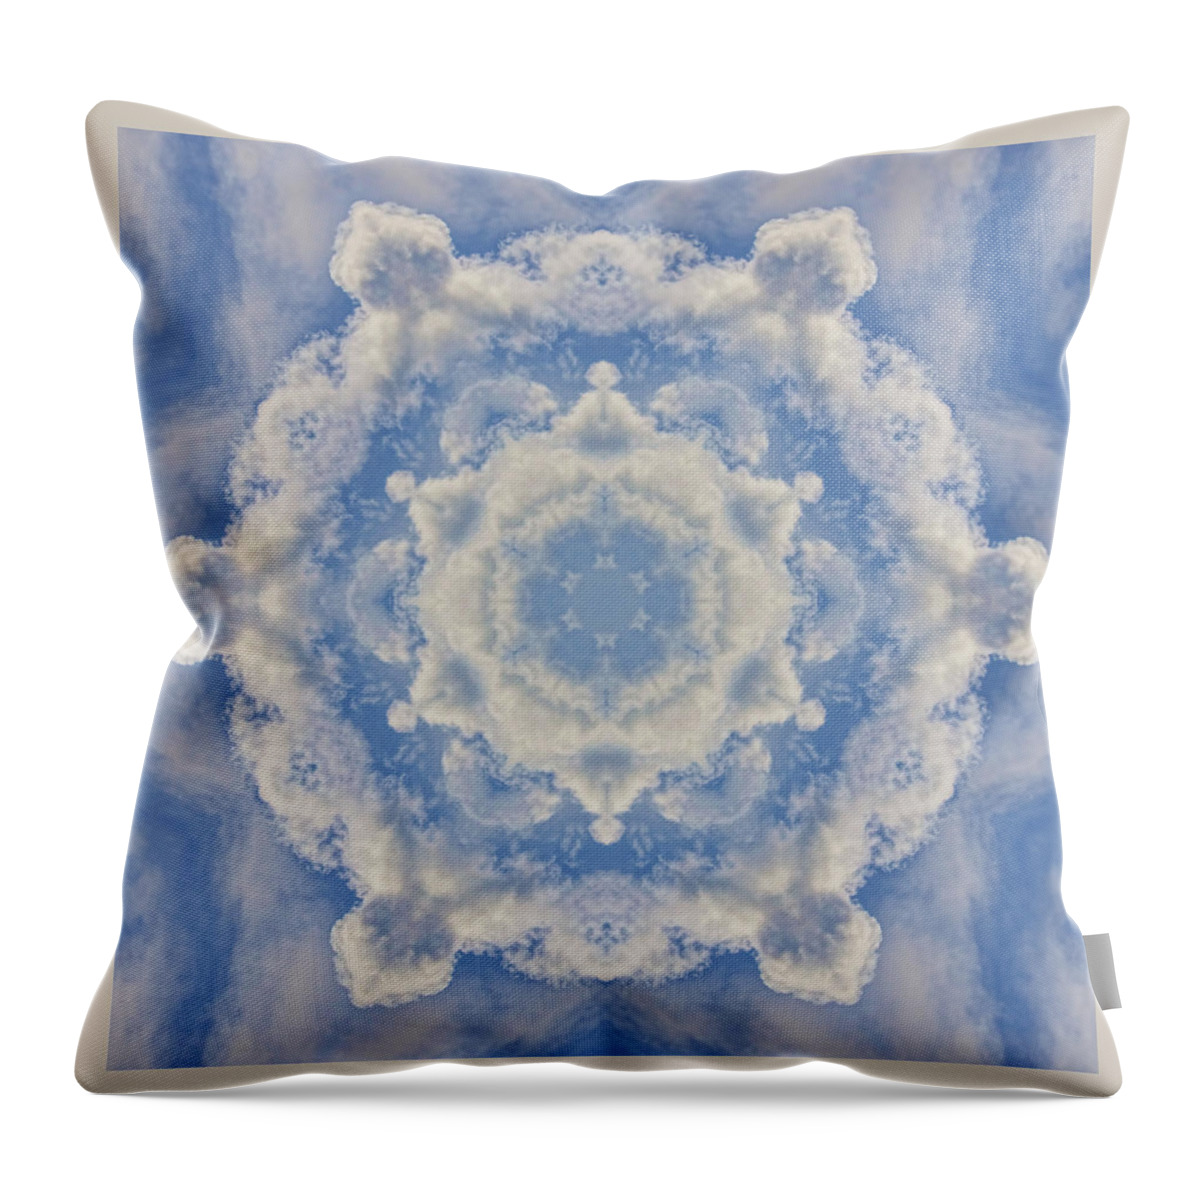 Clouds Throw Pillow featuring the photograph Clouds Mandala by Beth Sawickie